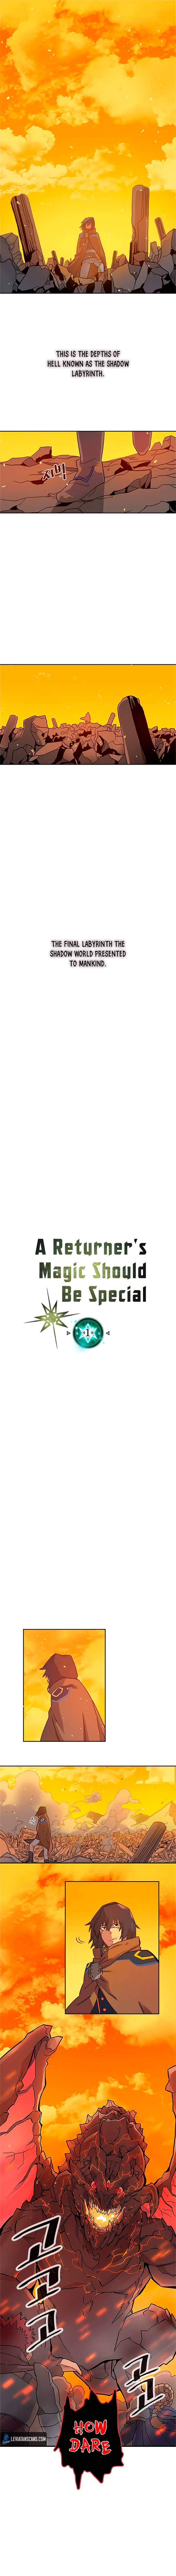 A Returner's Magic Should Be Special - Chapter 1 Page 2